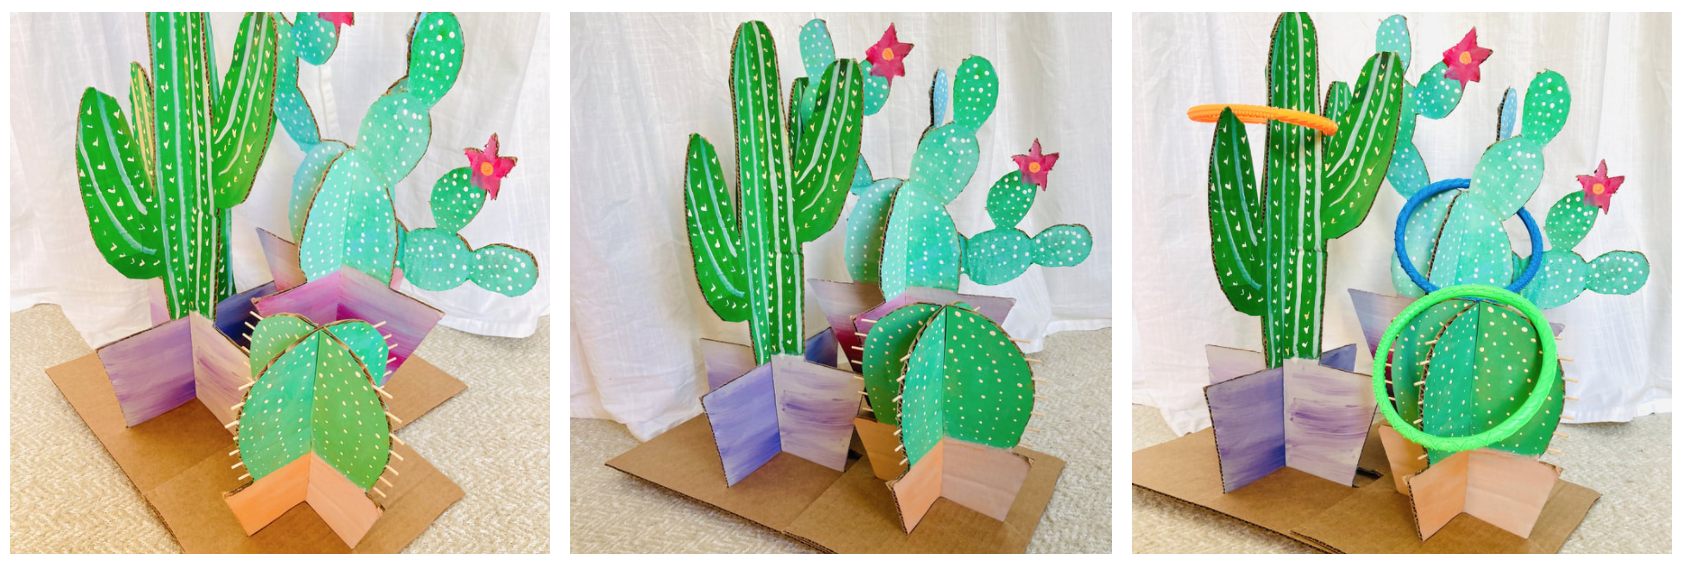 Paper Fireworks Craft - Perfect for New Year's or July 4th!